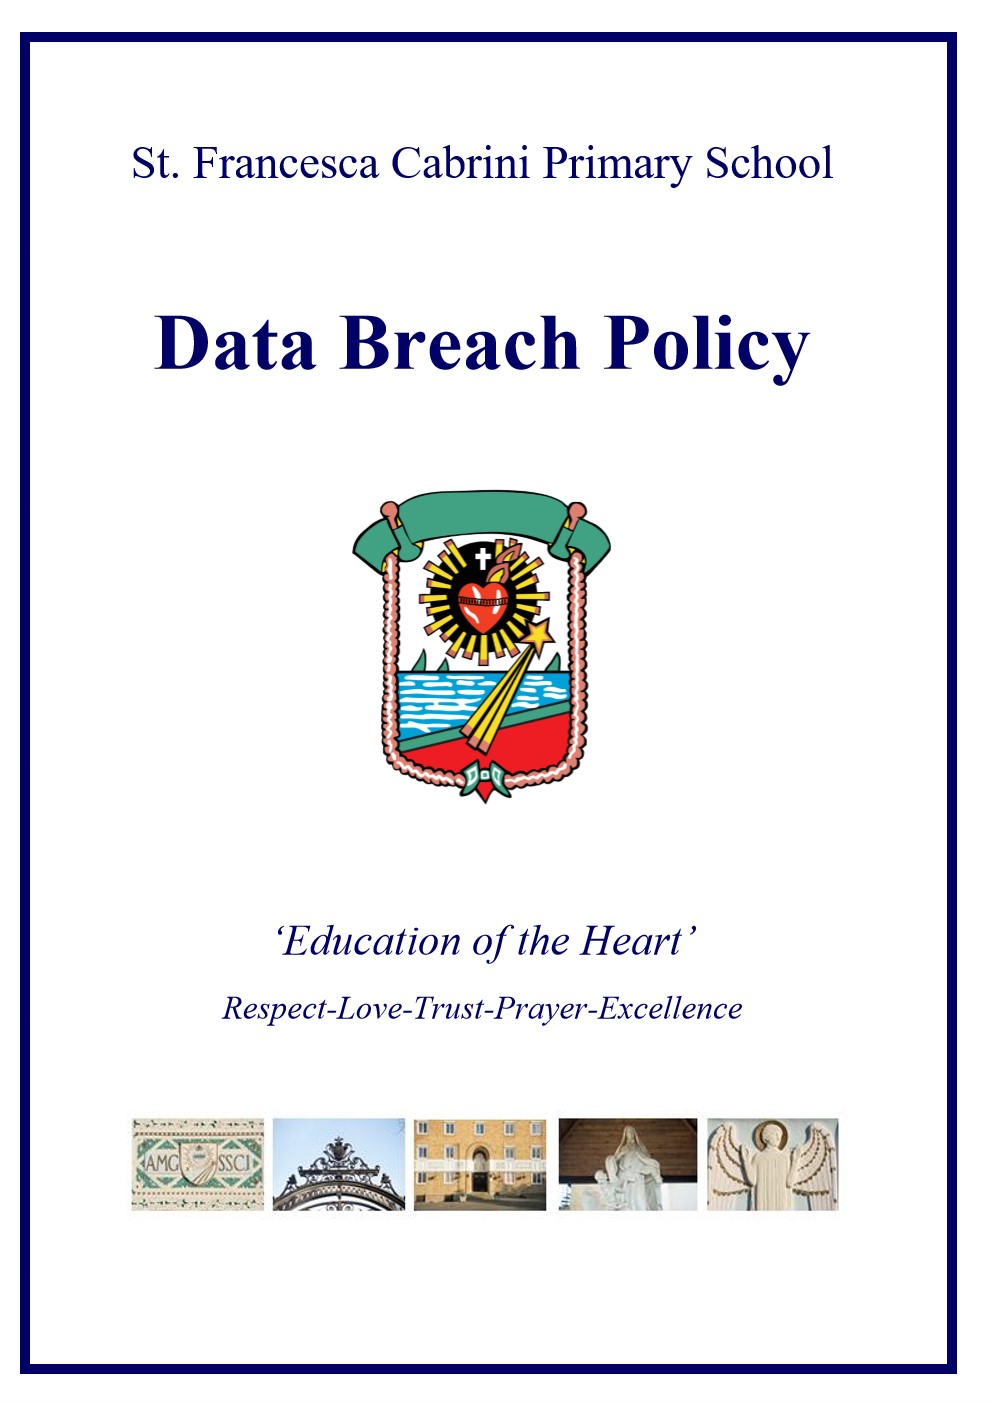 Data Protection Policy 2022